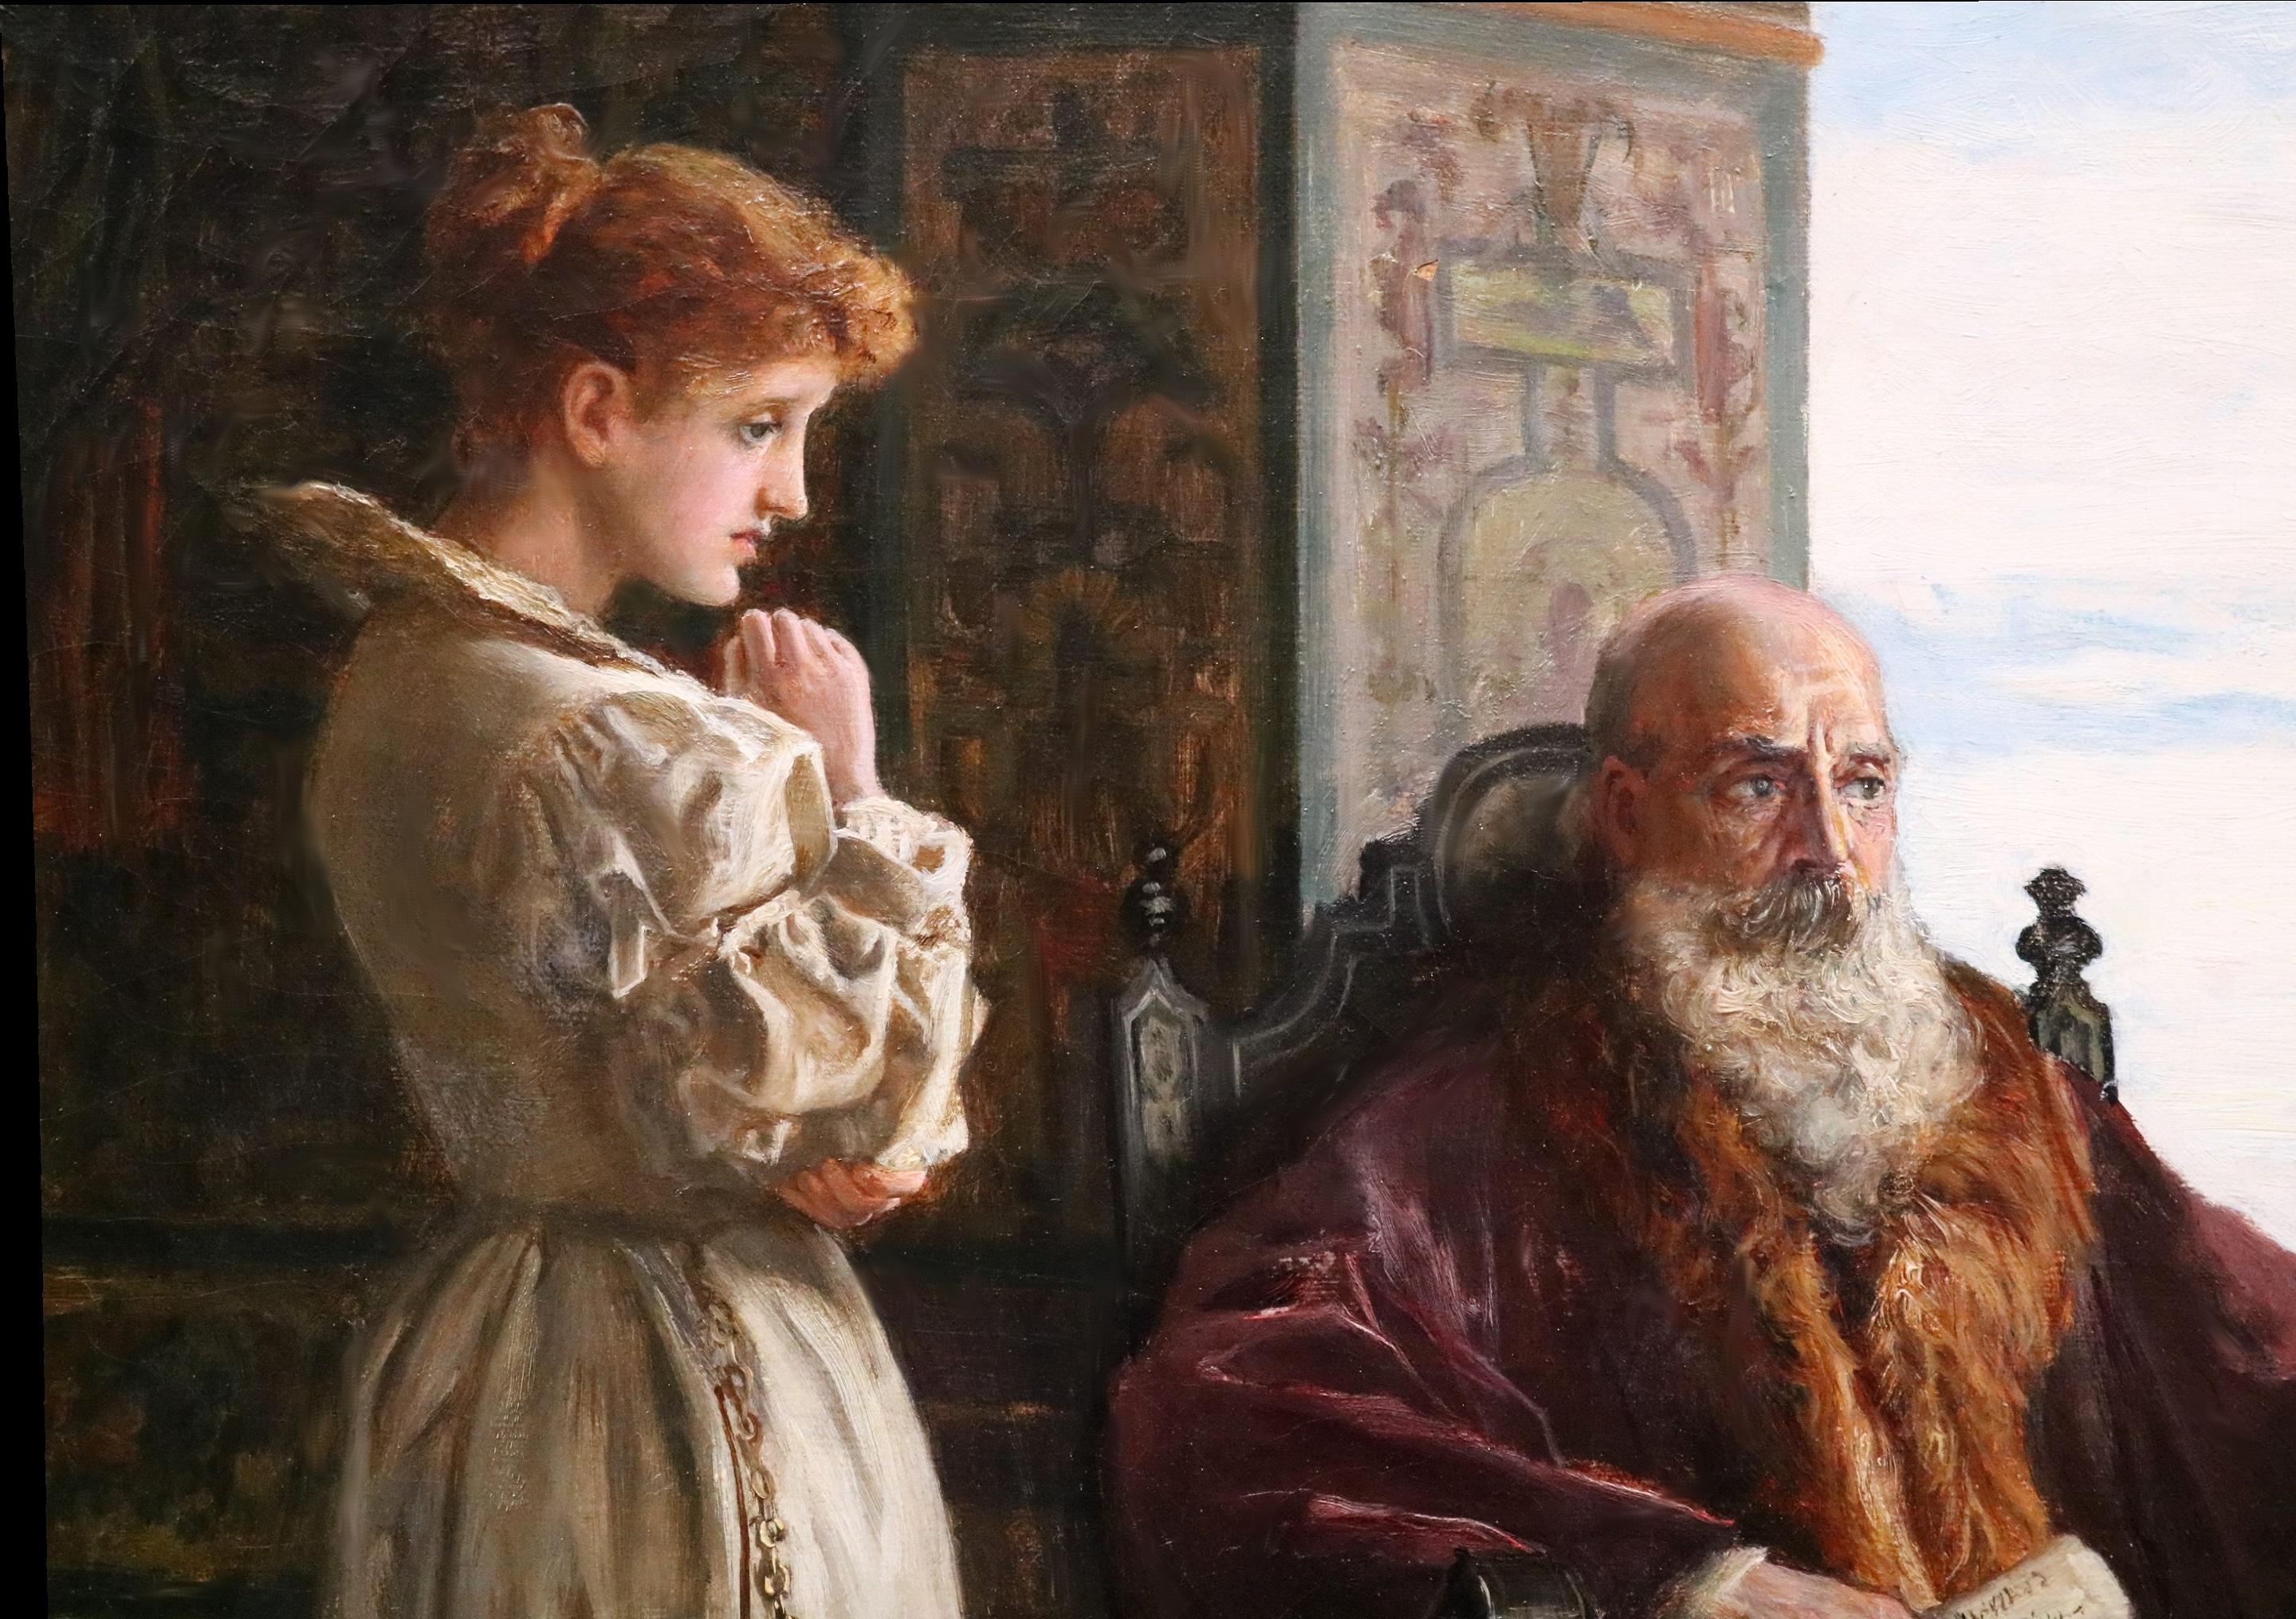 ‘Othello recounting his Adventures to Desdemona and Brabantio’ by Francis Sidney Muschamp (1851-1929). The painting is signed by the artist and dated 1893.

Francis Sydney Muschamp was taught by his father, the landscape painter Francis Muschamp